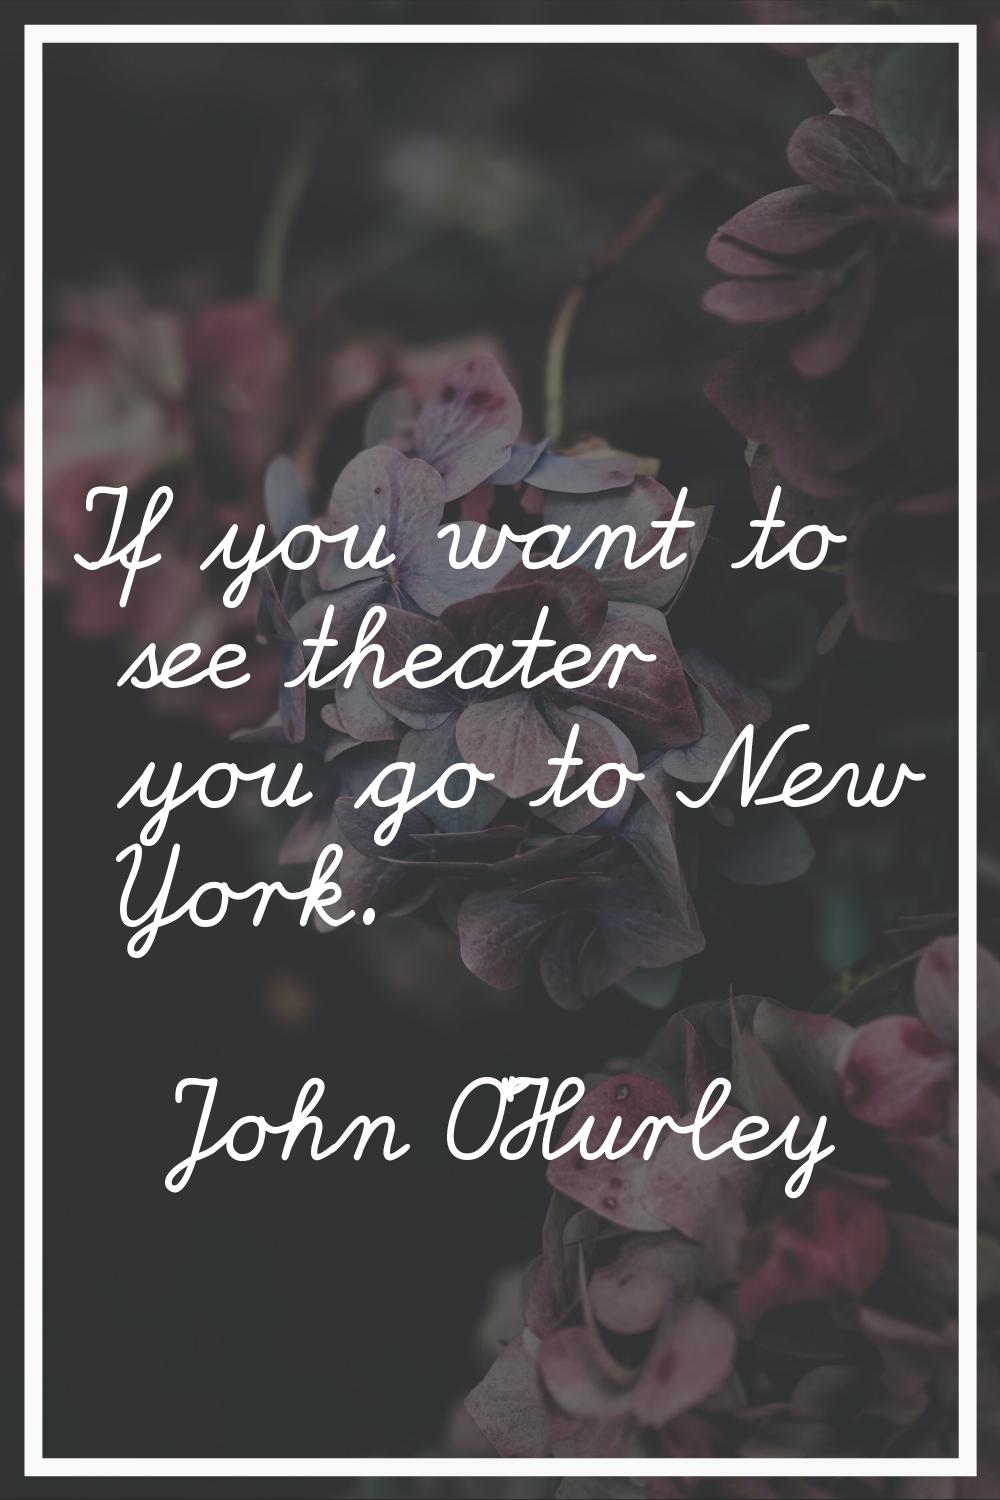 If you want to see theater you go to New York.